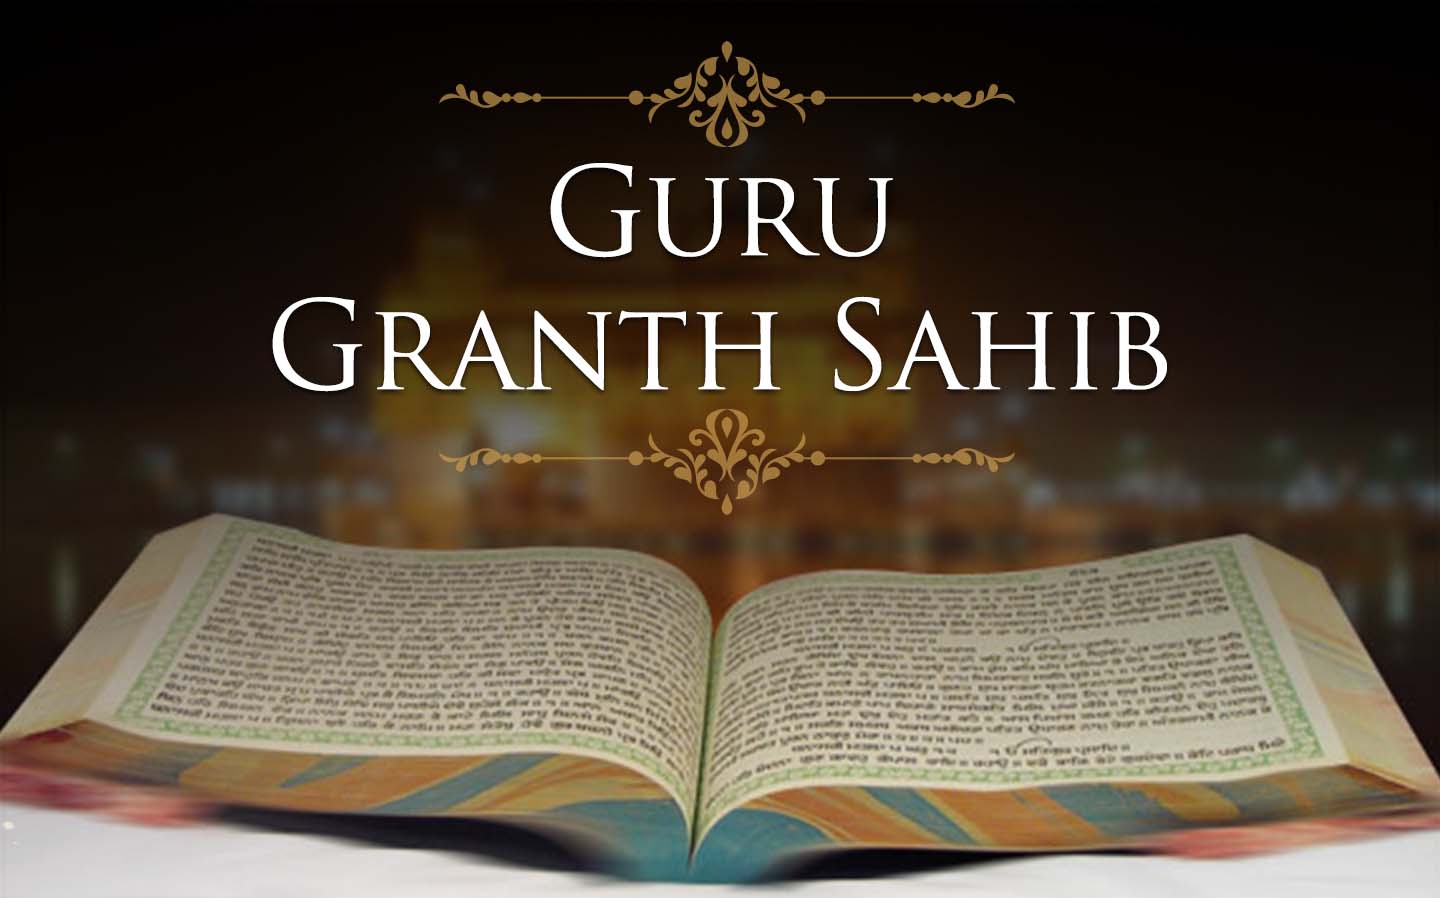 Petition To Transfer Cases Associated With The Sacrilege Of The Guru Granth Sahib Gets Dismissed By The Supreme Court Lawsisto Legal News picture photo